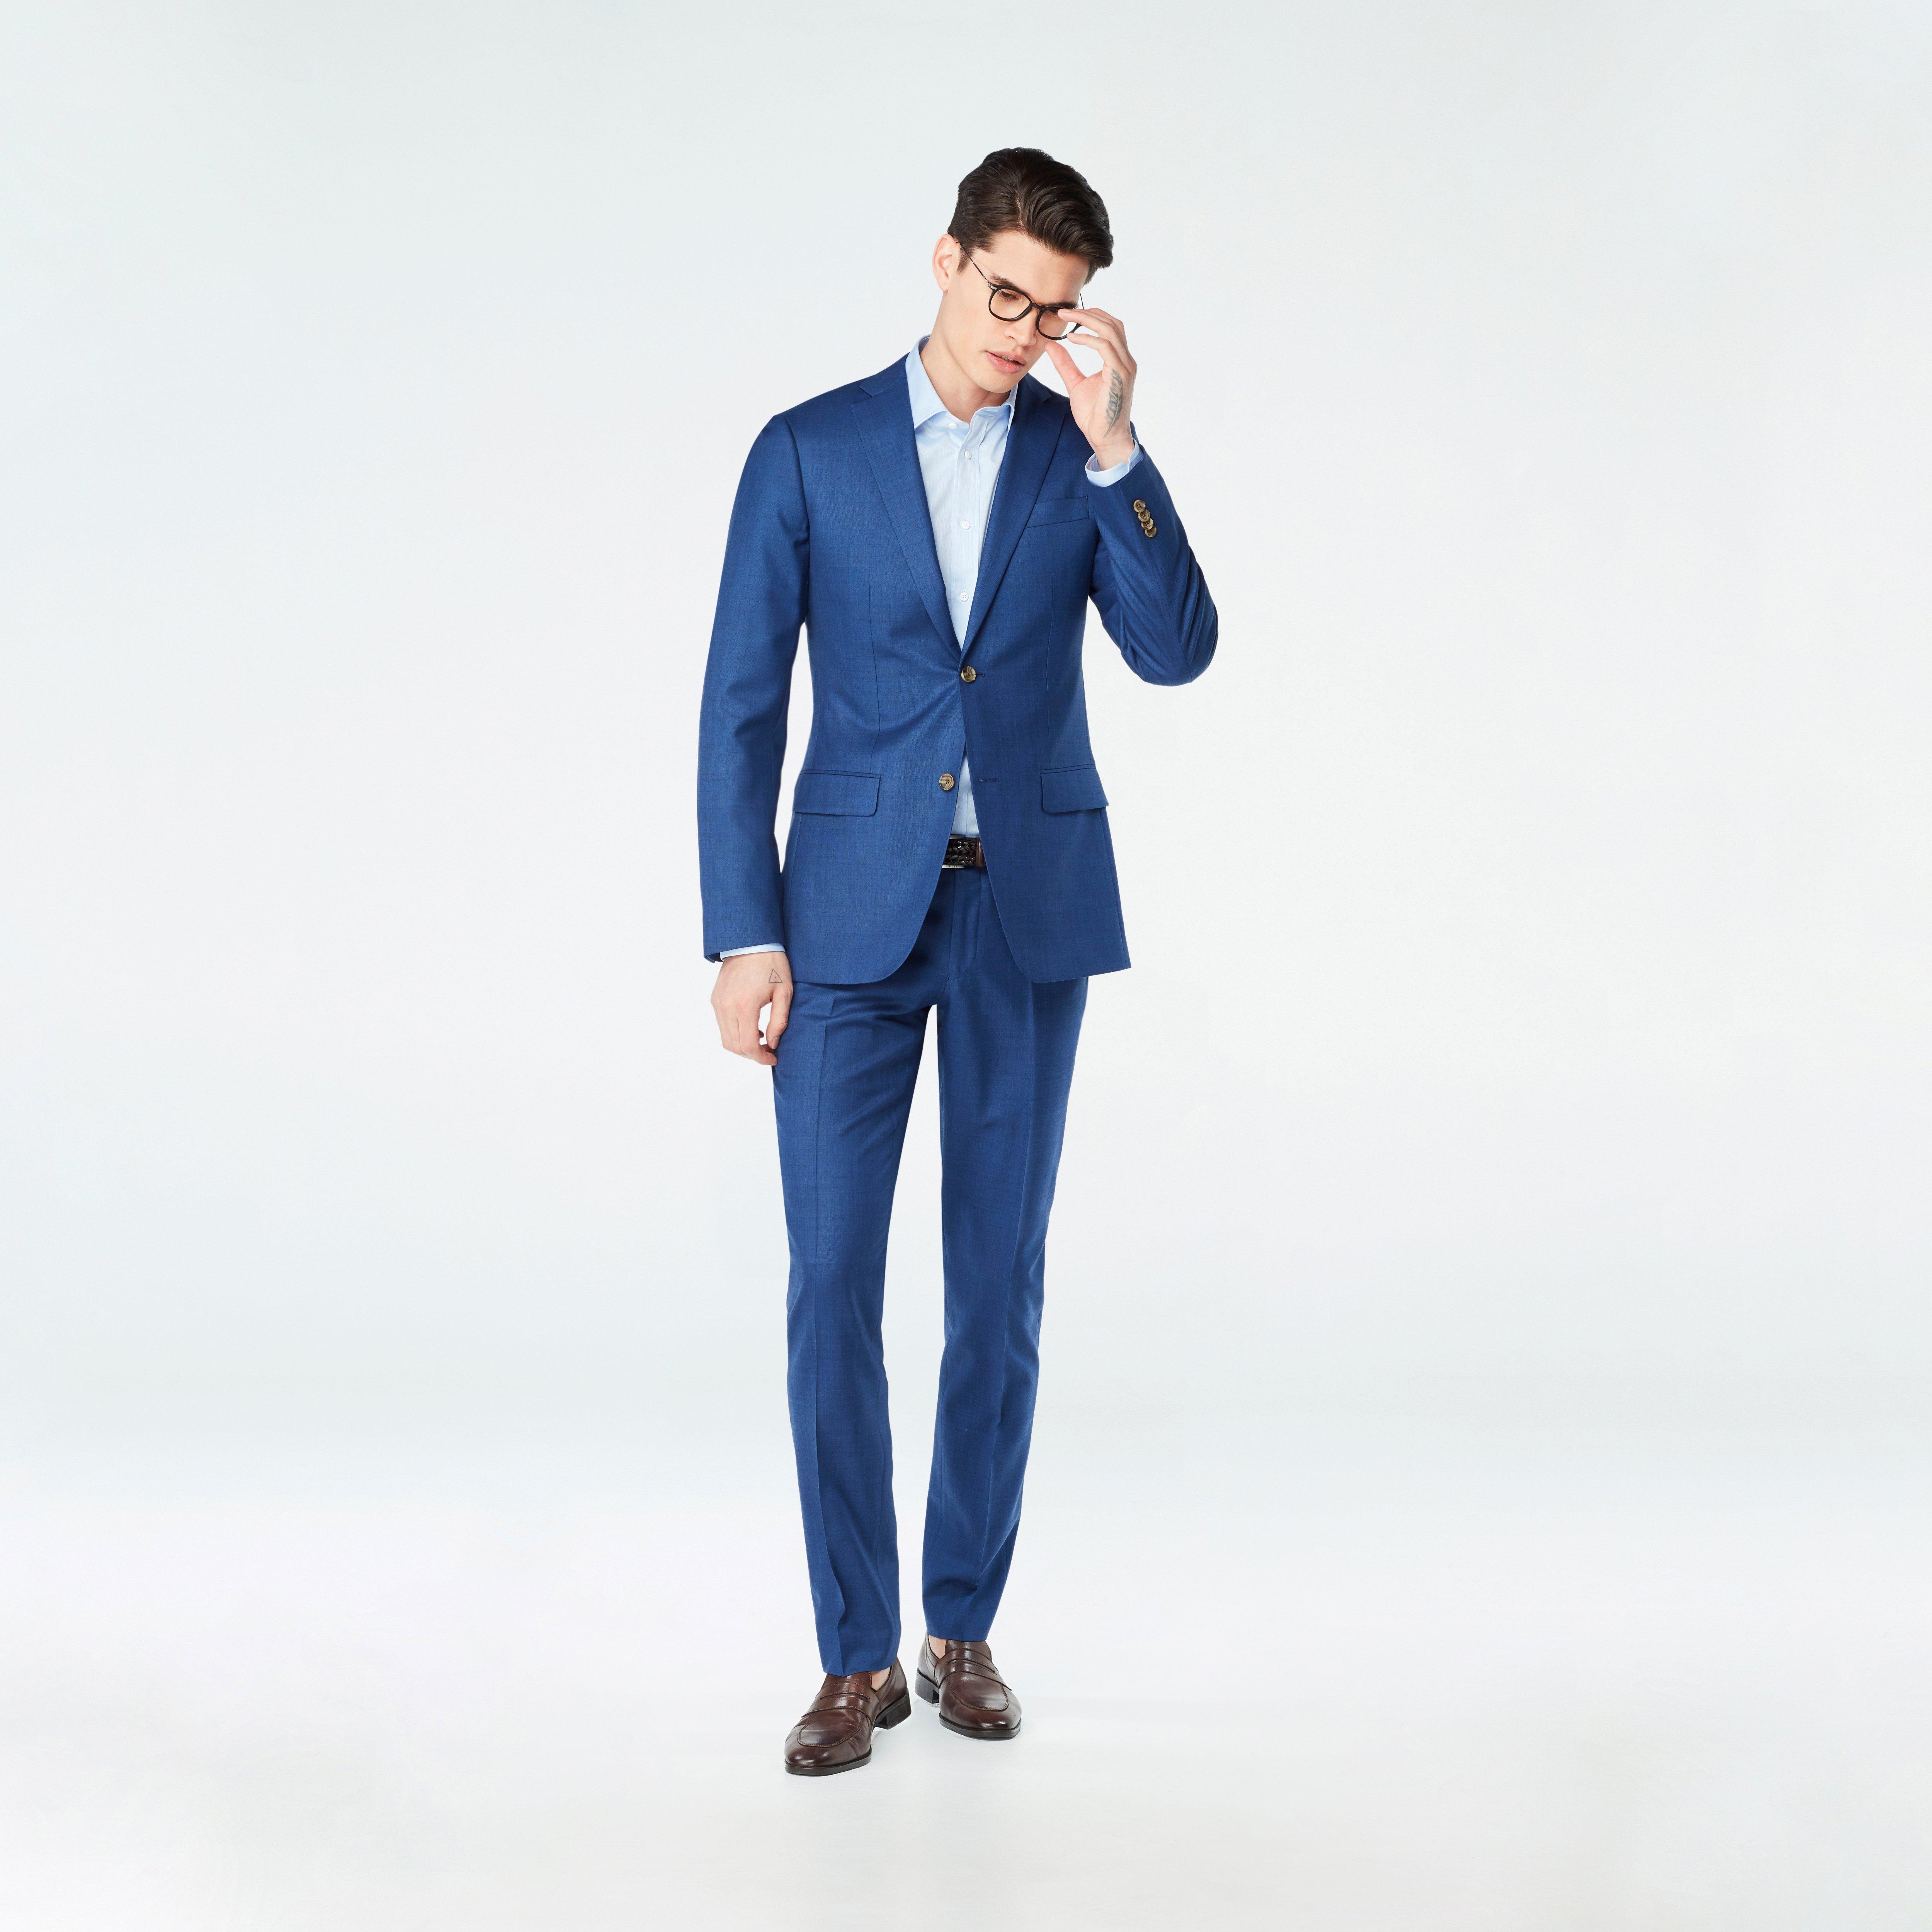 Custom Suits Made For You - Hayle Sharkskin Blue Suit | INDOCHINO